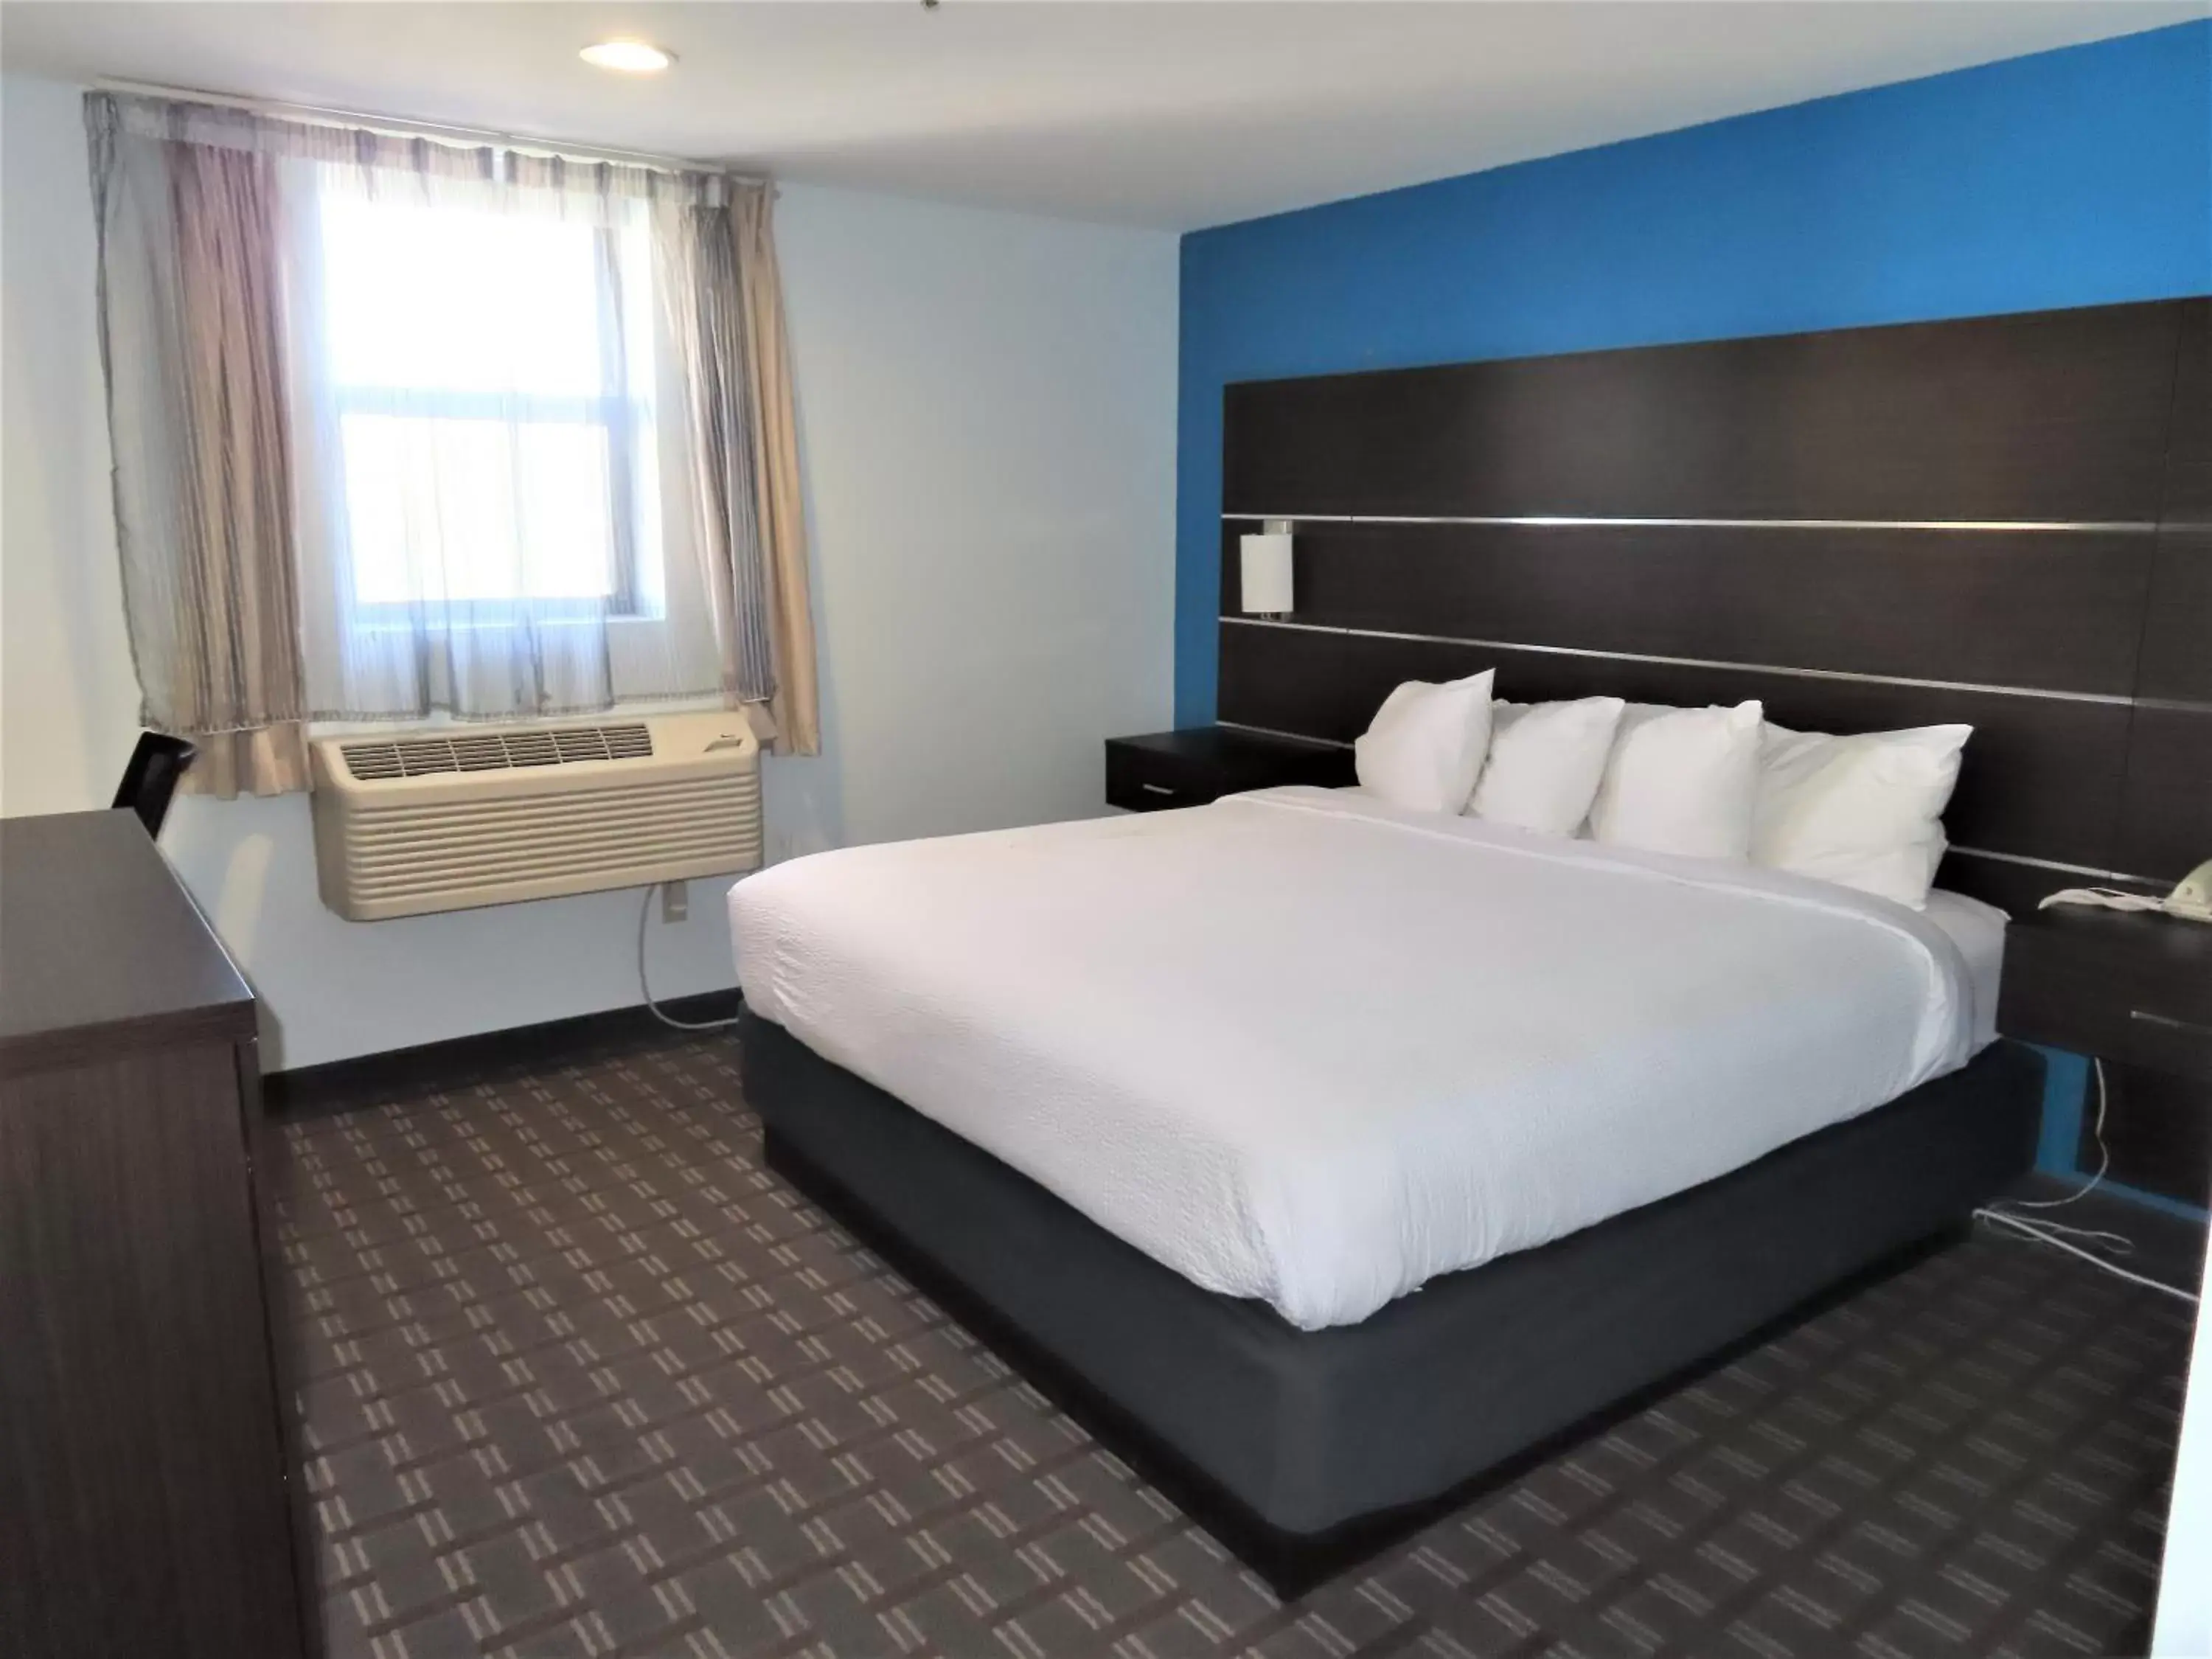 King Room - single occupancy - Non-Smoking in St Charles Hotel Downtown Hudson